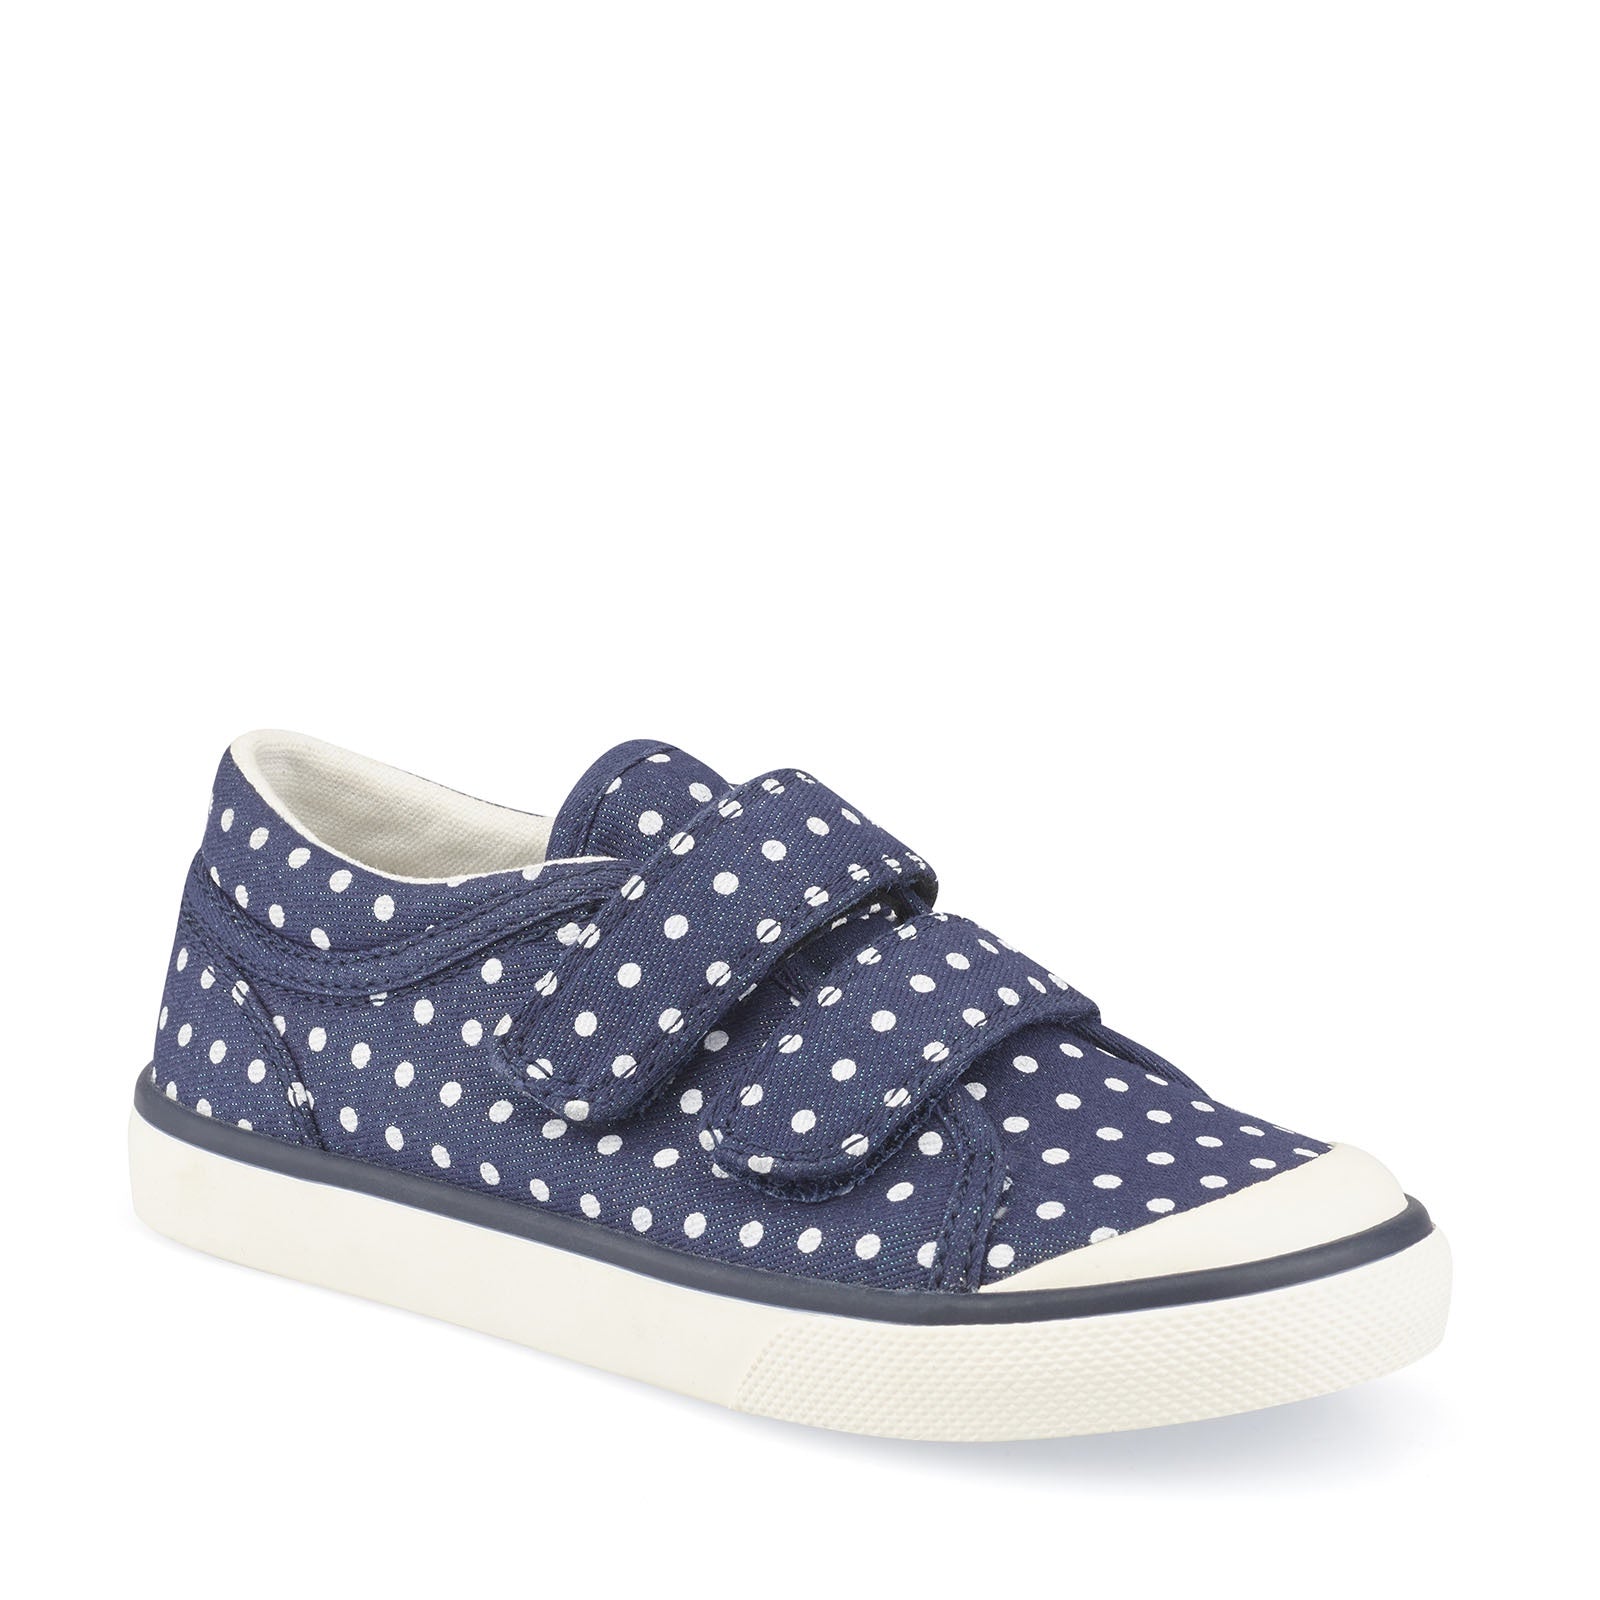 Start-Rite Bounce 6168-9 Girls Navy Dotted Canvas Rip-Tape Fastening Shoe - elevate your sole